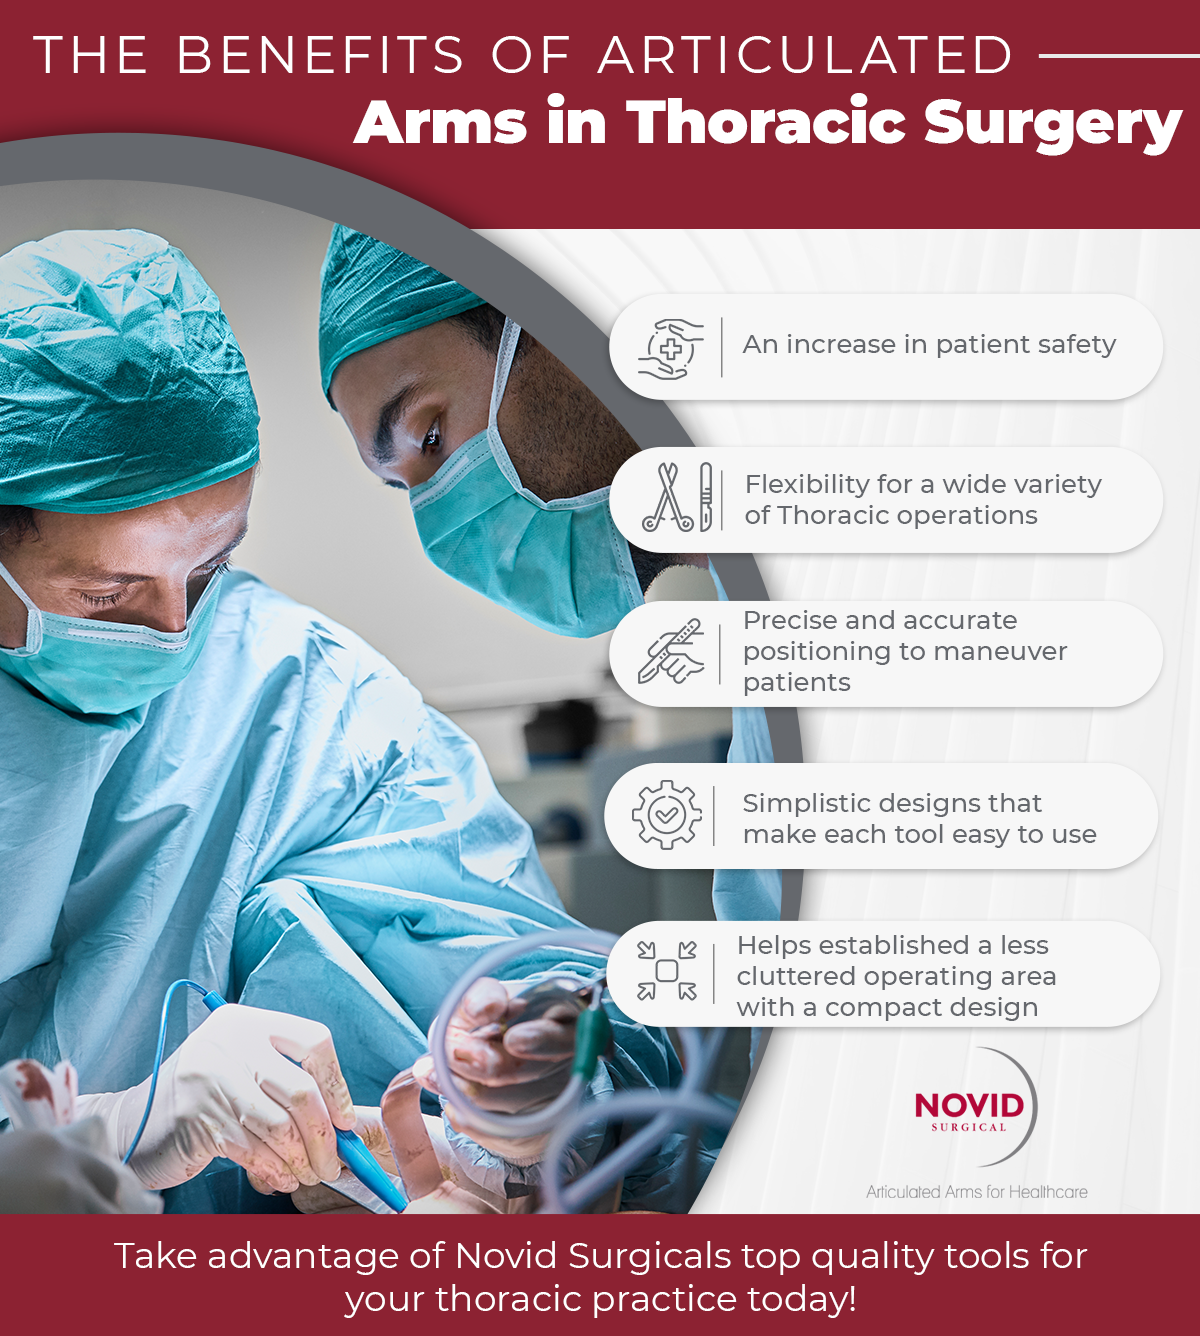 The Benefits of Articulated Arms in Thoracic Surgery